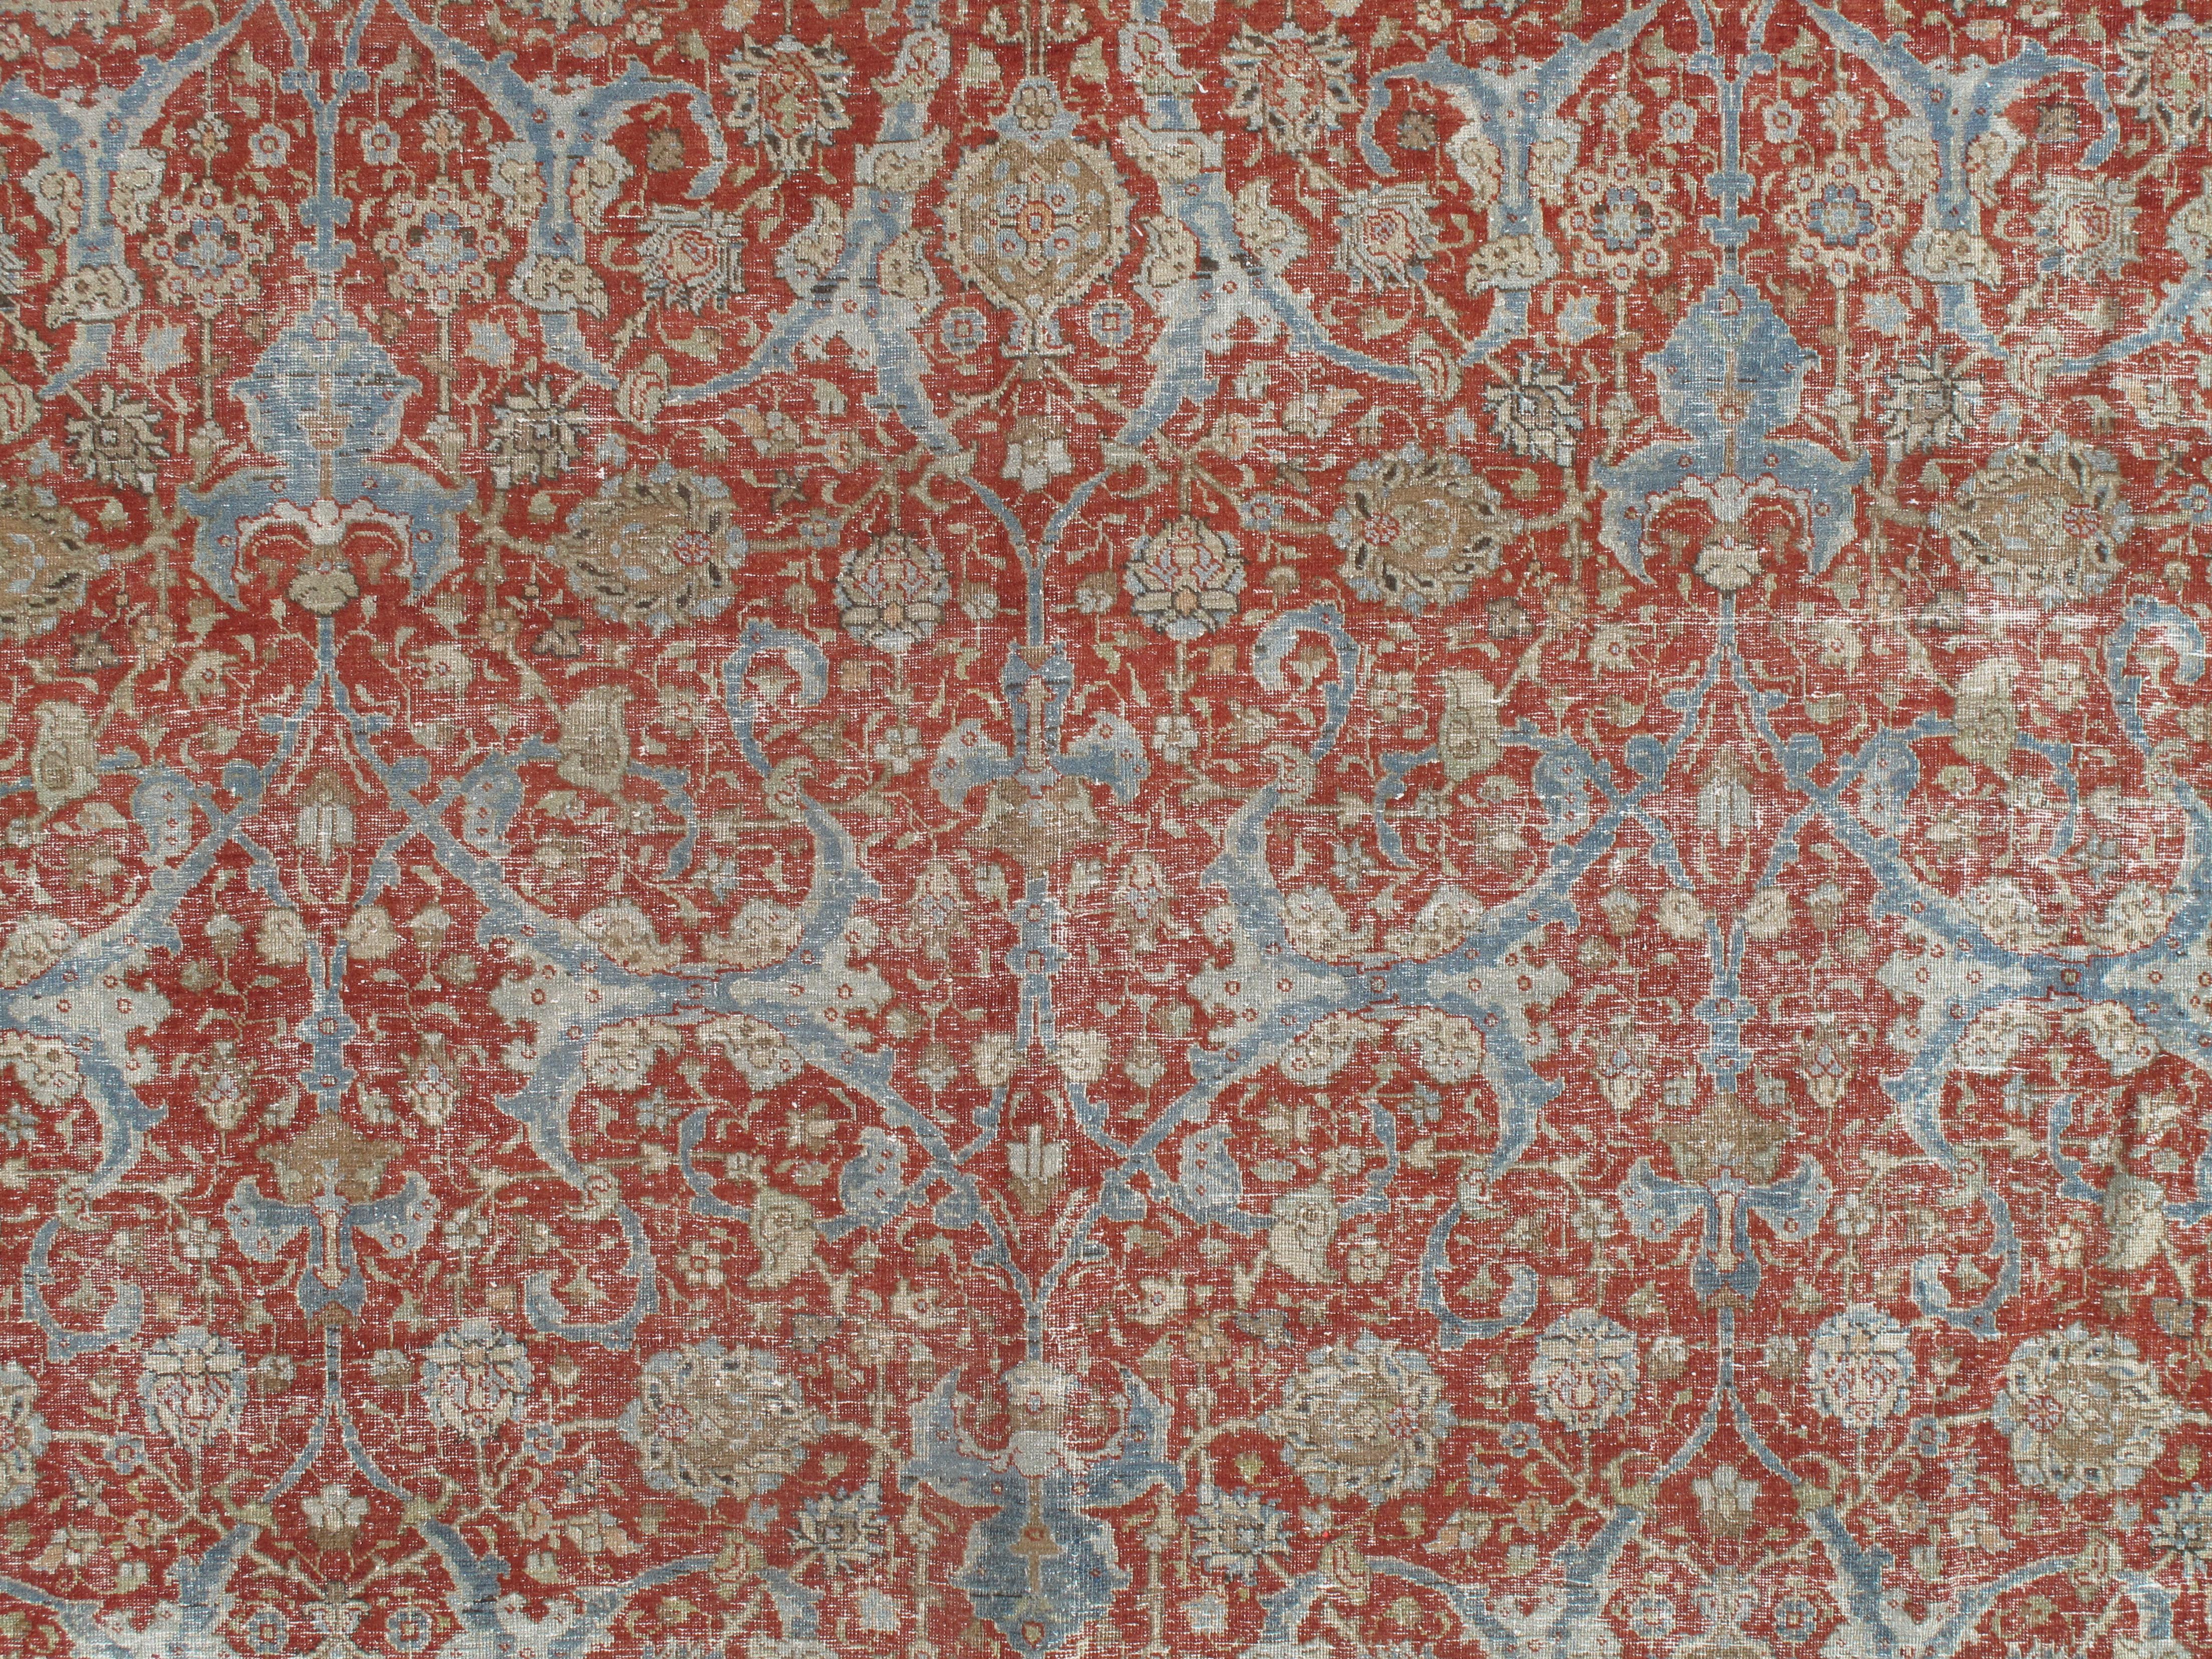 Hand-Knotted Antique Tabriz Rug, Handmade Oriental Rug in Terracotta, Light Blue and Taupe